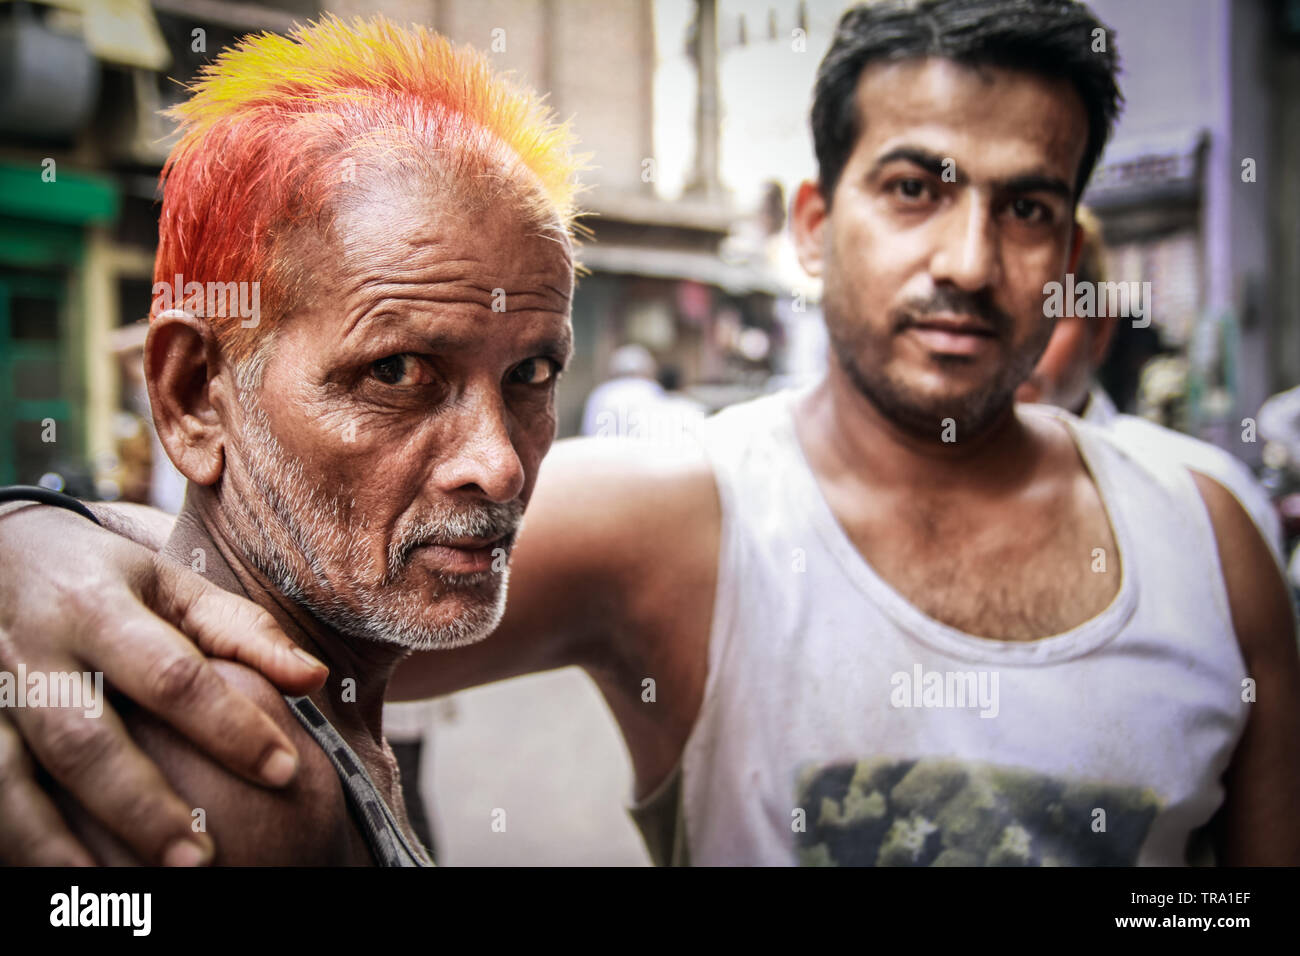 Two men on the streets of India with attitude, one with vivid henna dyed hair another a street wise and tough looking friend. A Reality portrait Stock Photo